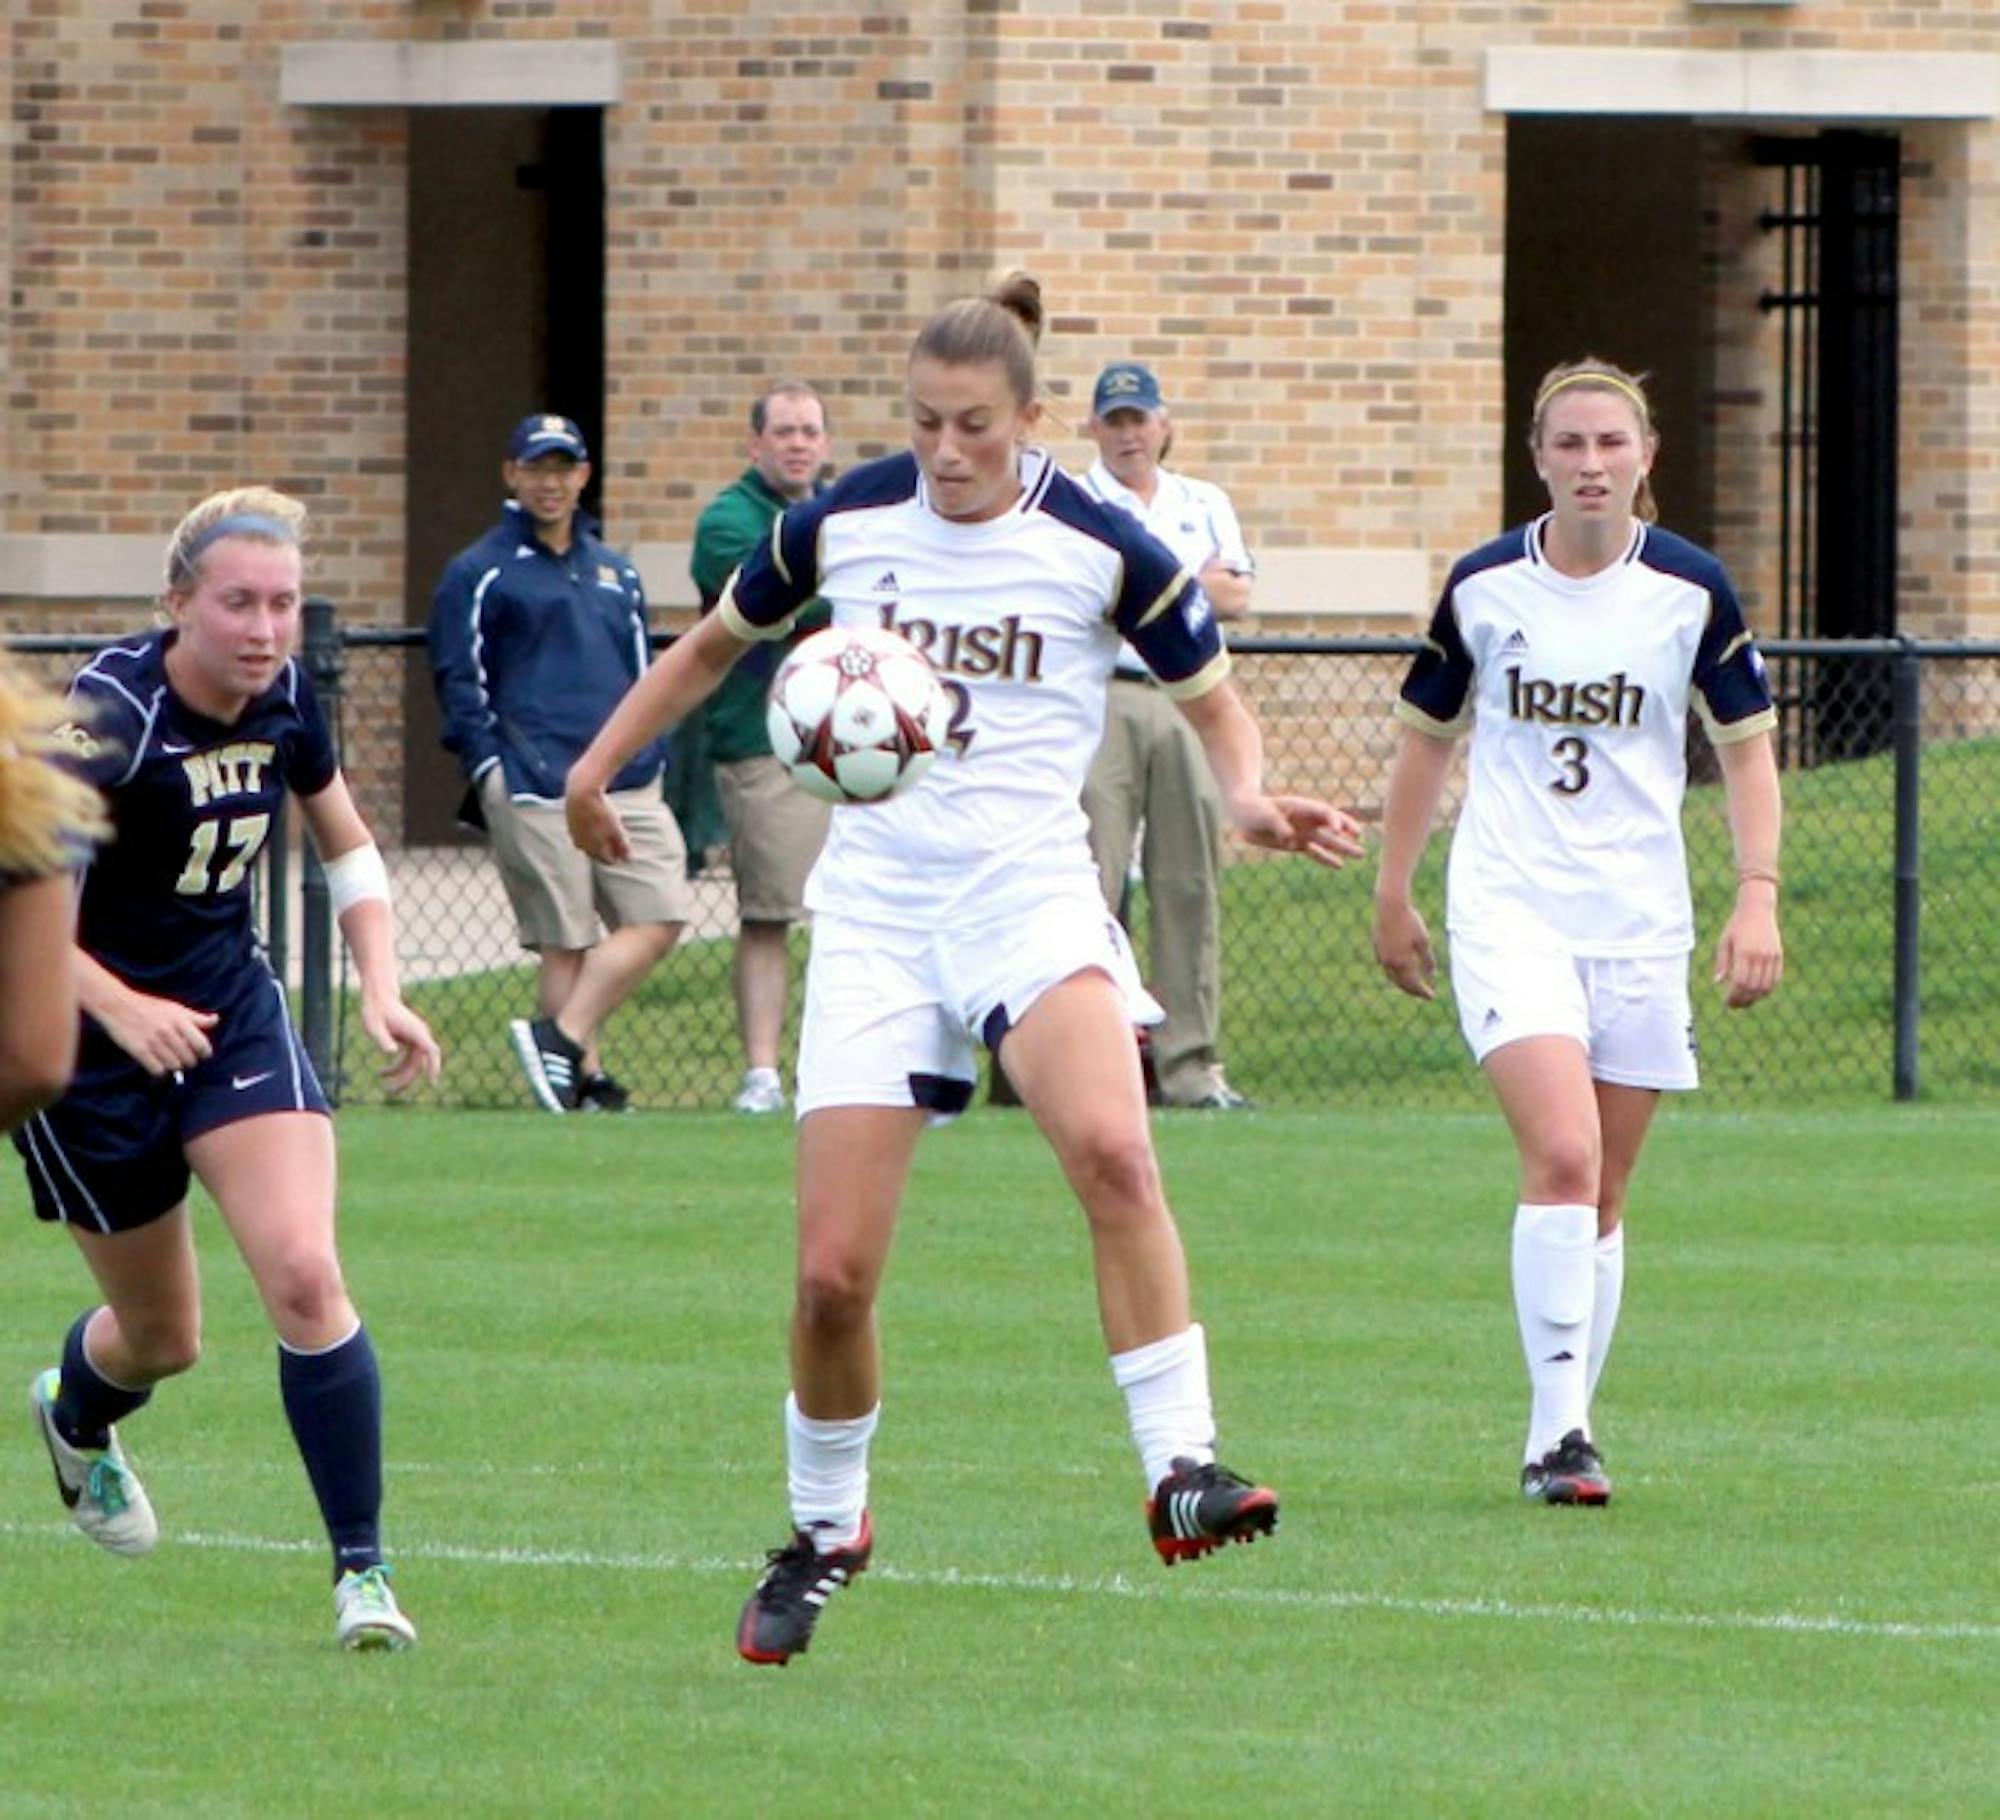 Senior midfielder Mandy Laddish traps the ball in Notre Dame’s 3-0 win against Pittsburgh on Sept. 29 at Alumni Stadium. Laddish  scored a goal and tallied five shots in the match, which brought Notre Dame’s record to 9-1.